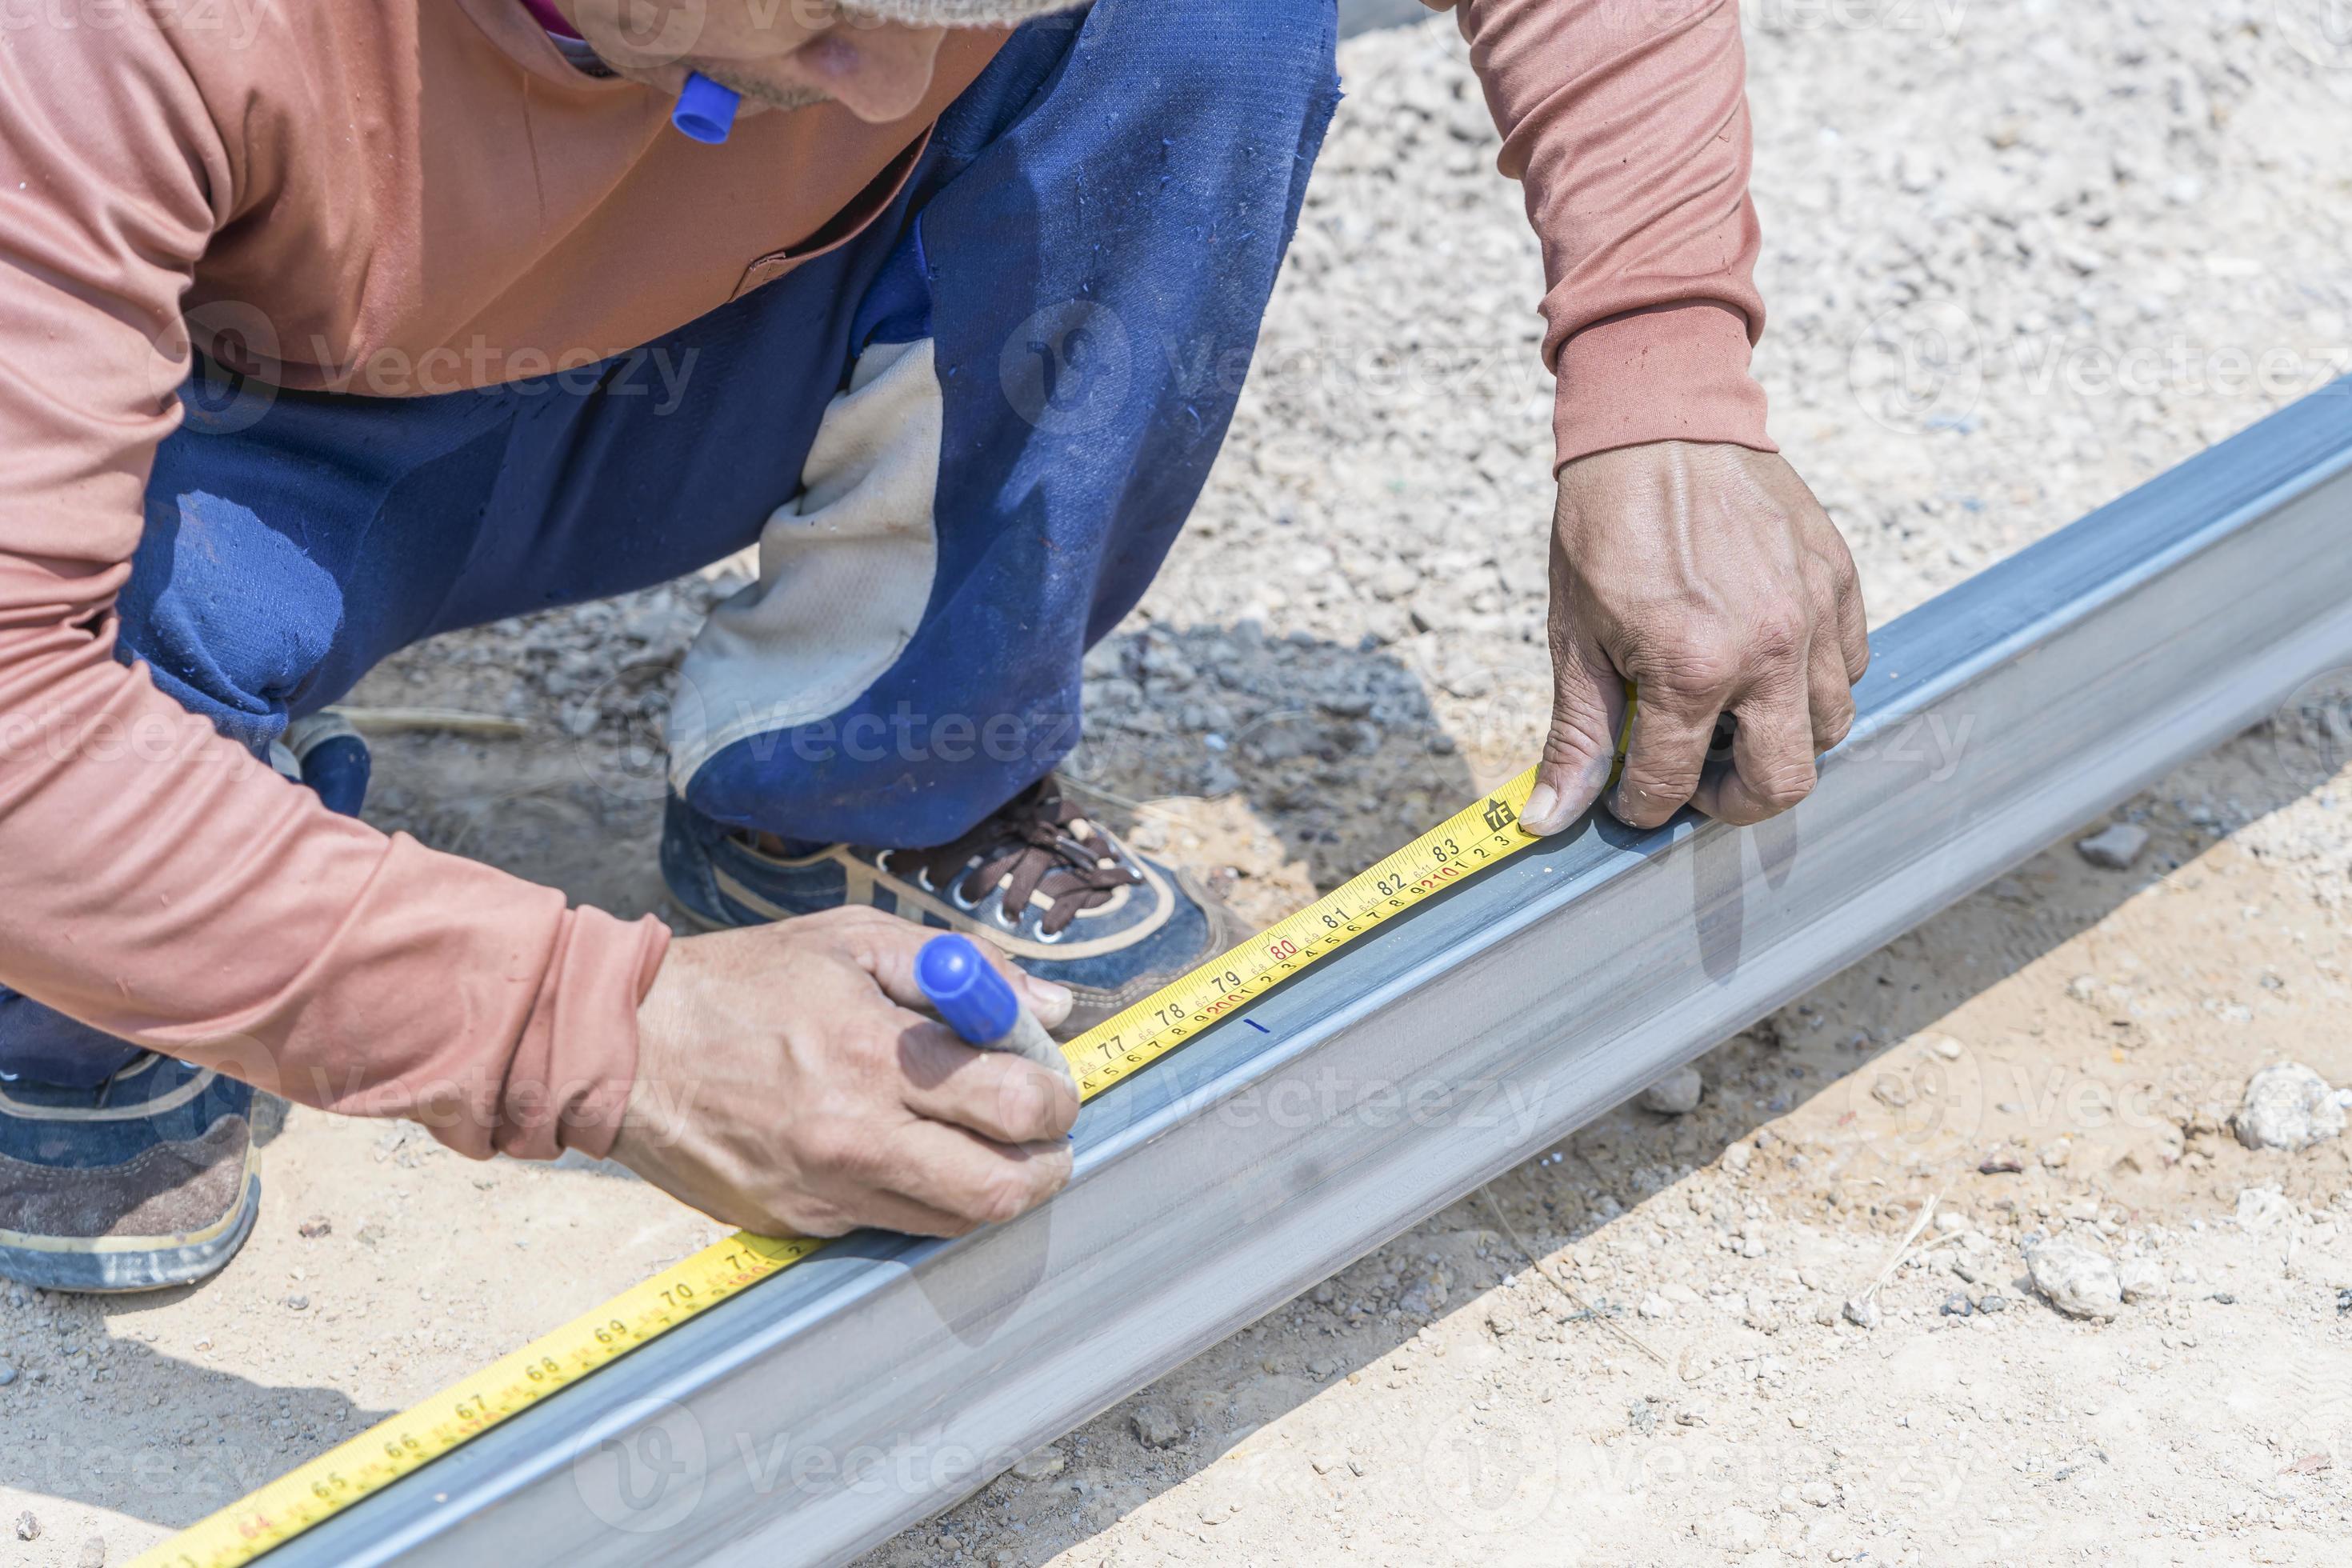 3 Uses for Measuring Tapes in Construction